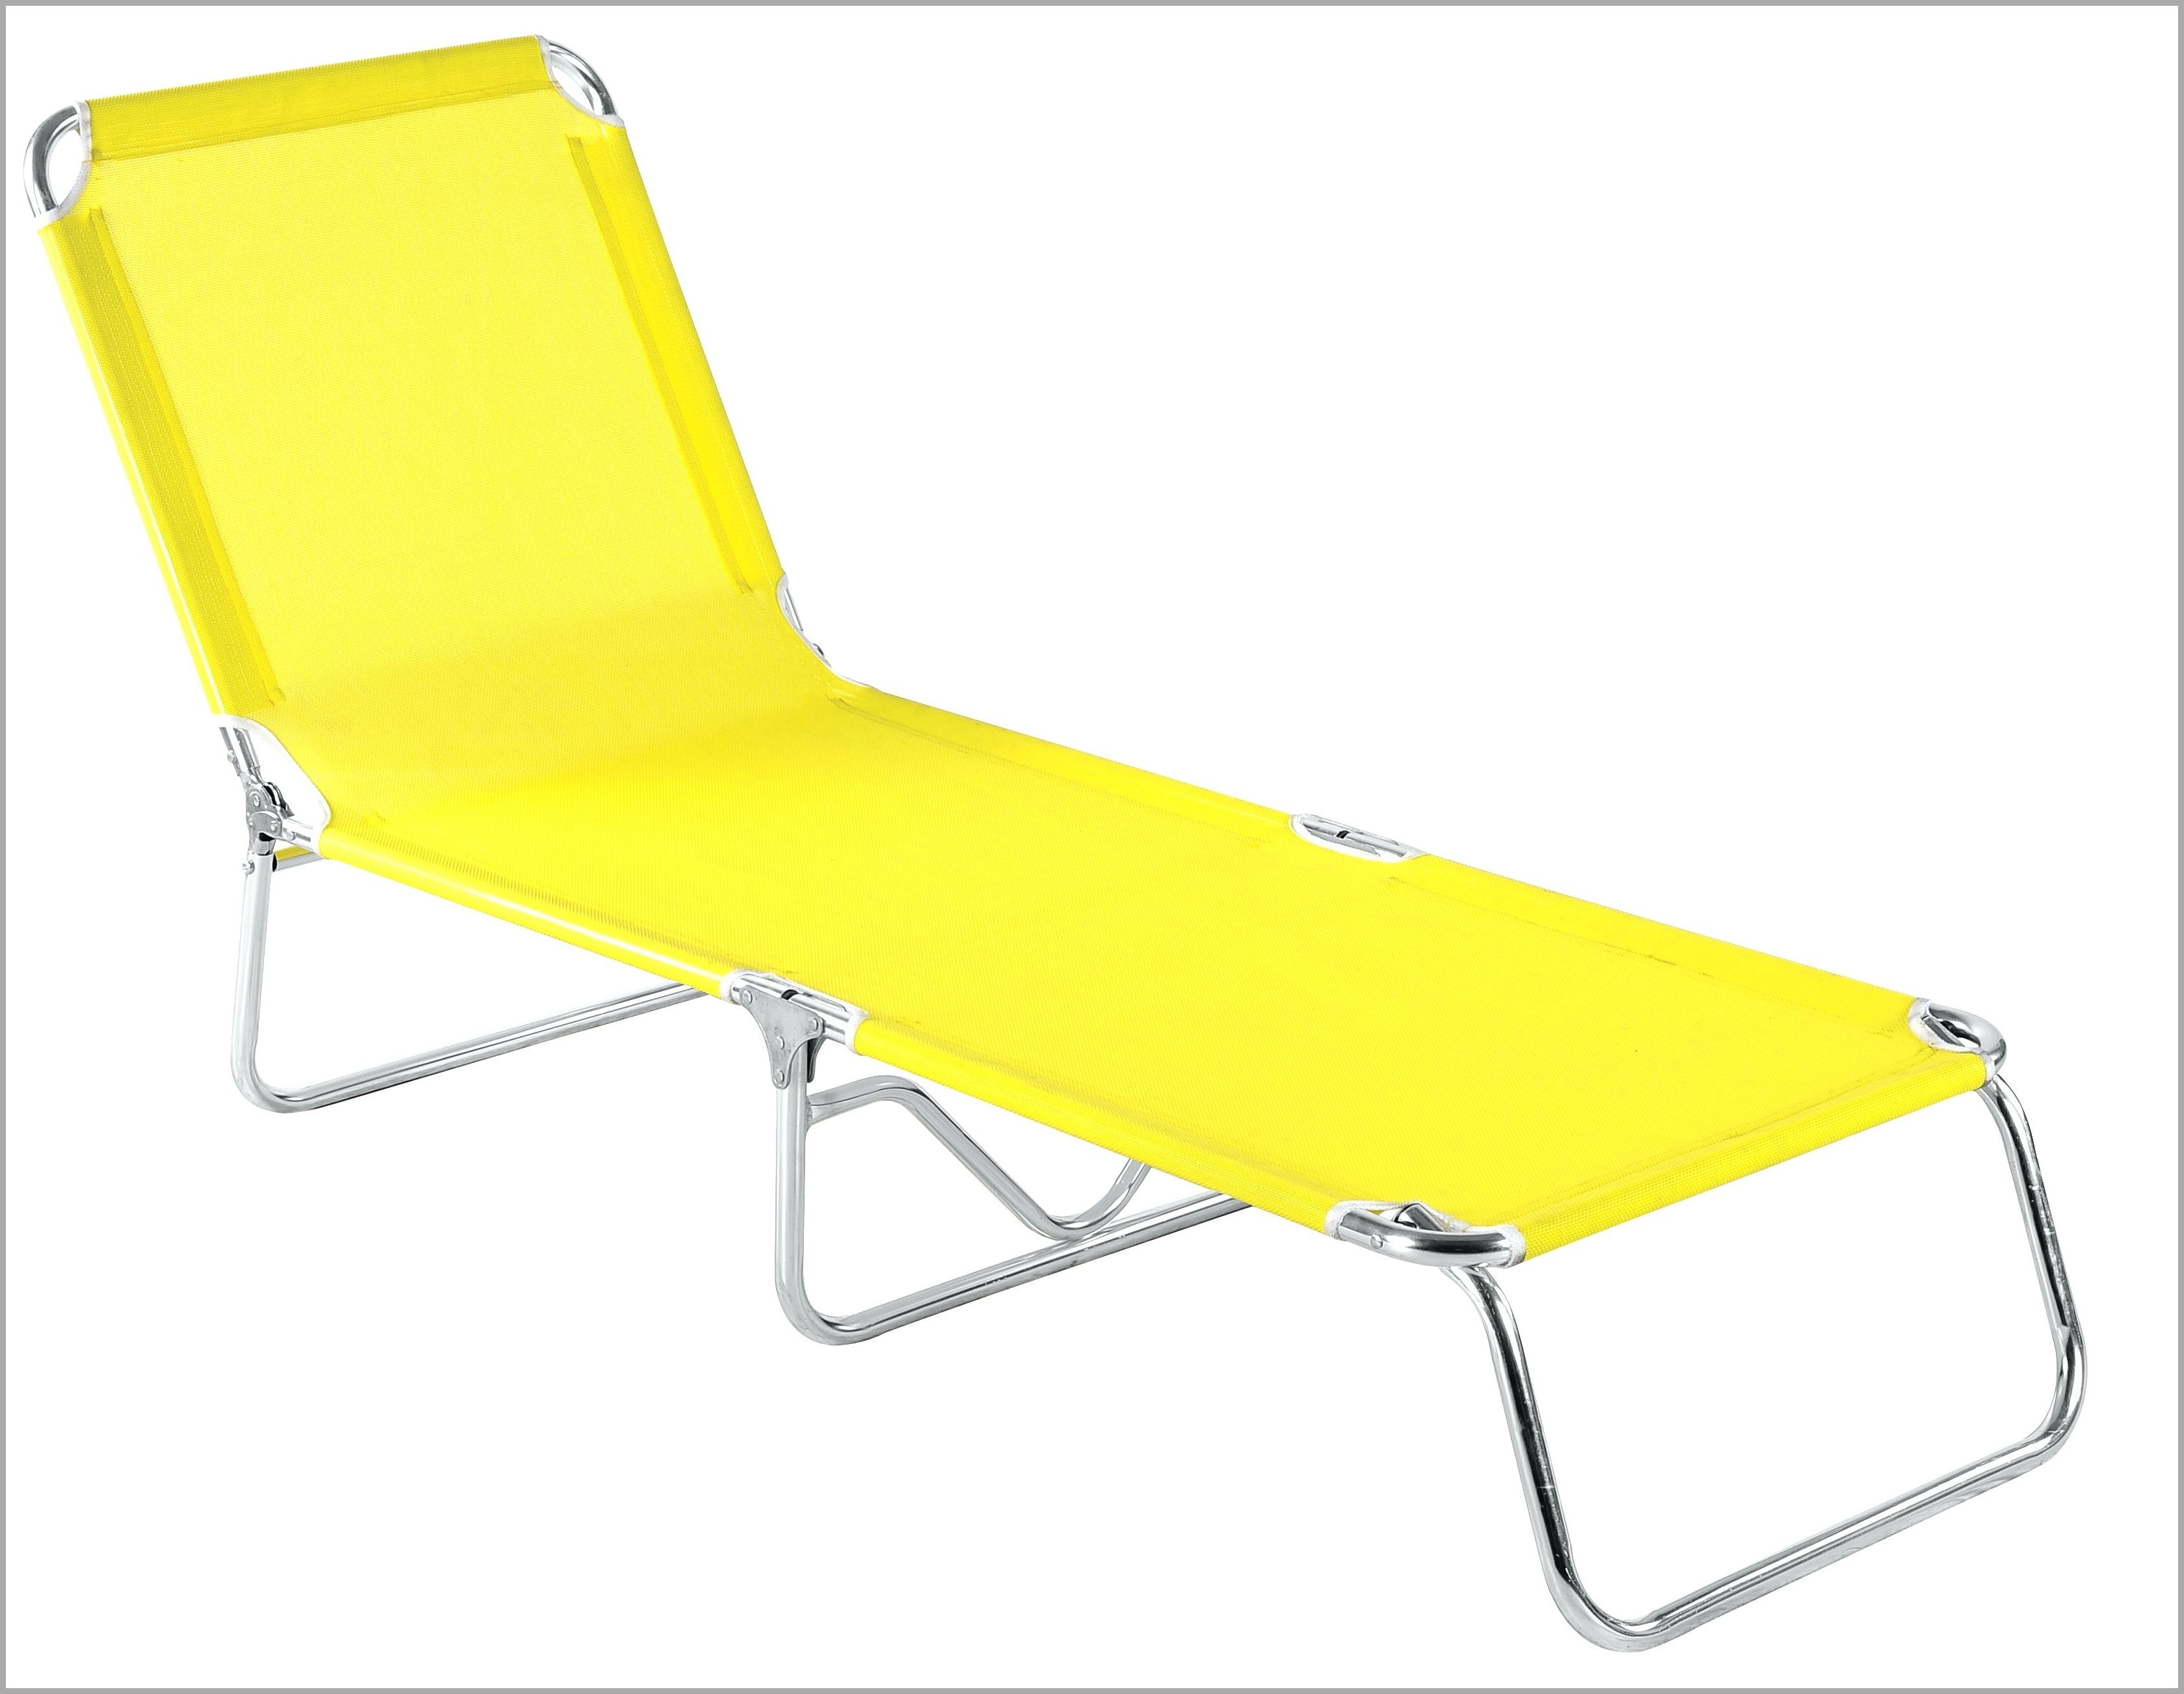 Most Current Marvelous Target Lawn Chairs Folding Decor 447648 – Chair Ideas In Chaise Lounge Chairs At Target (View 4 of 15)